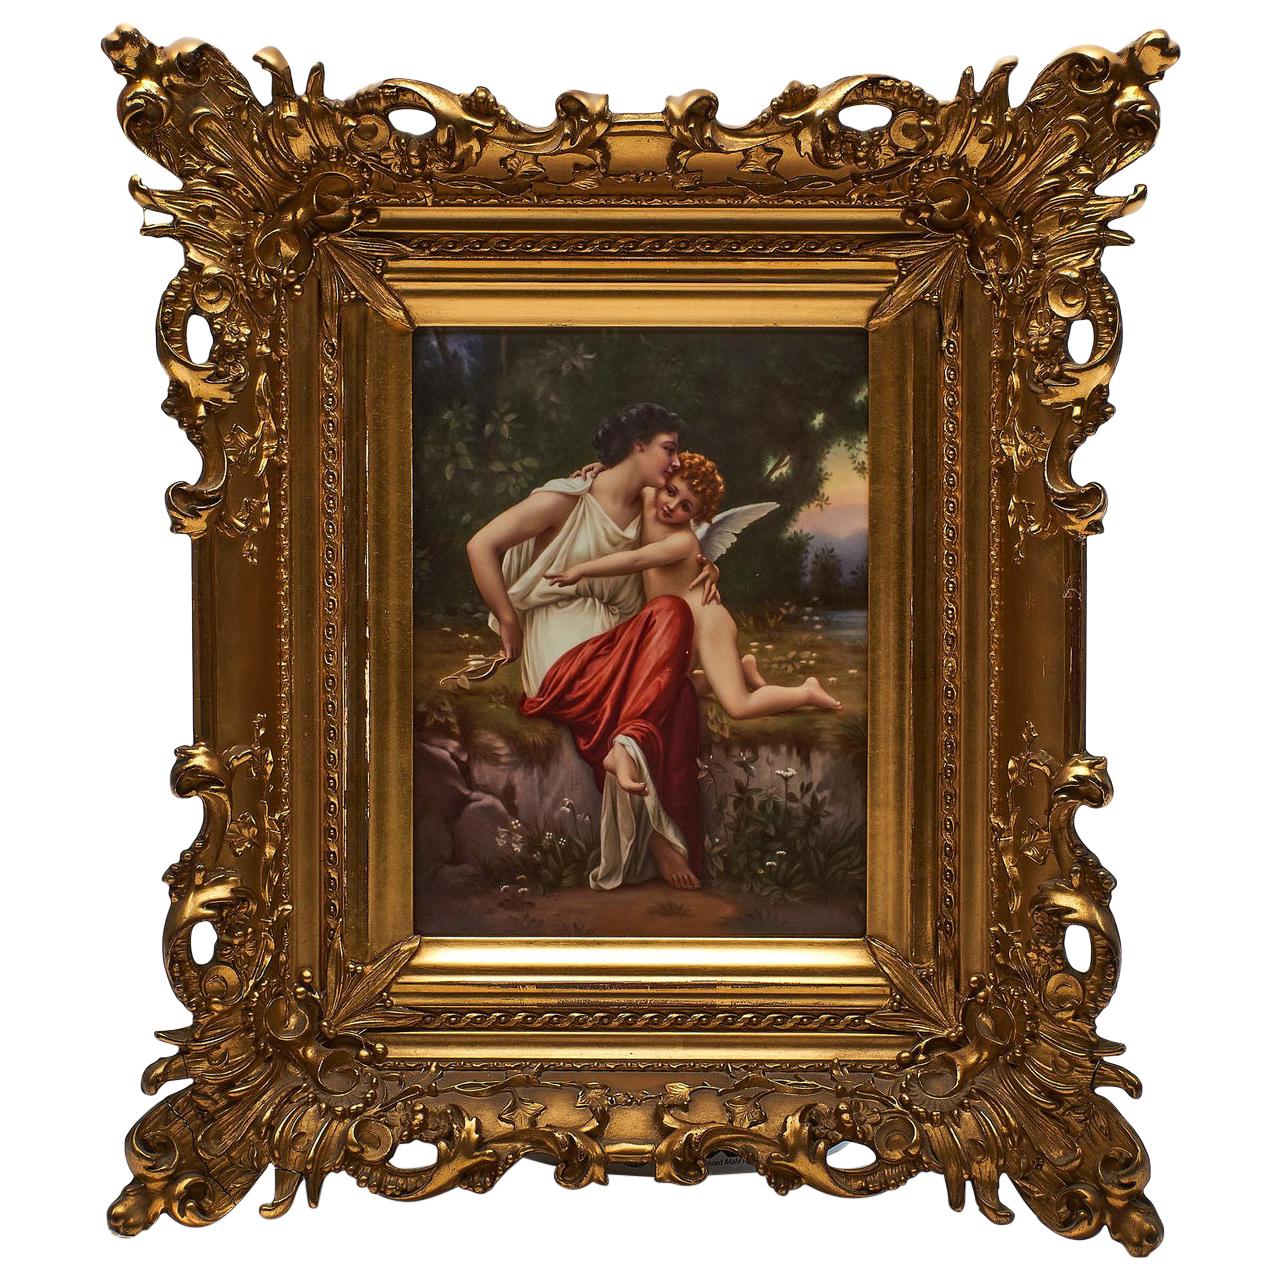 KPM Porcelain Plaque of a Goddess and Cupid For Sale